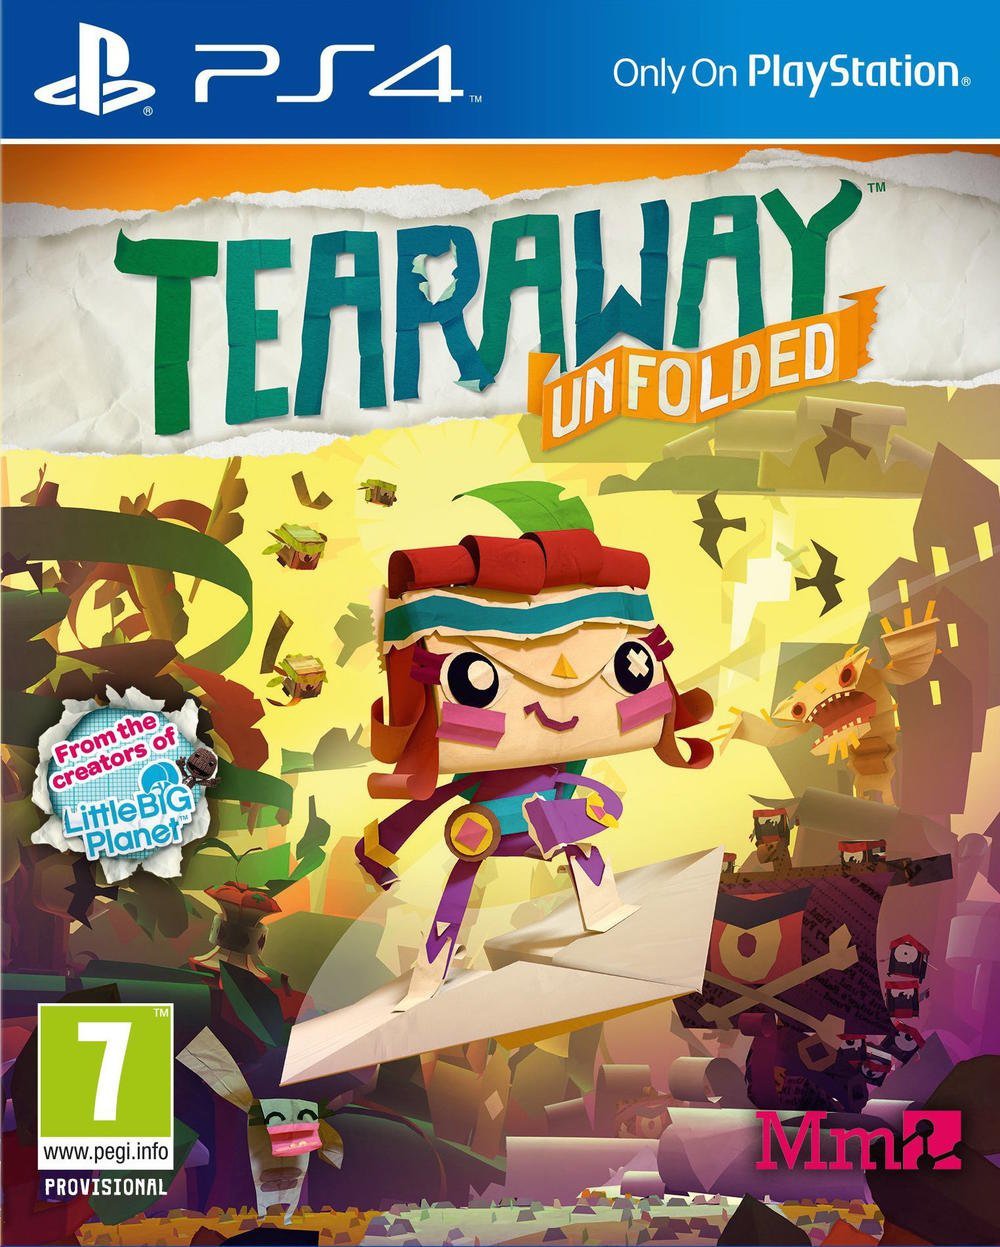 tearaway-unfloded-ps4-large